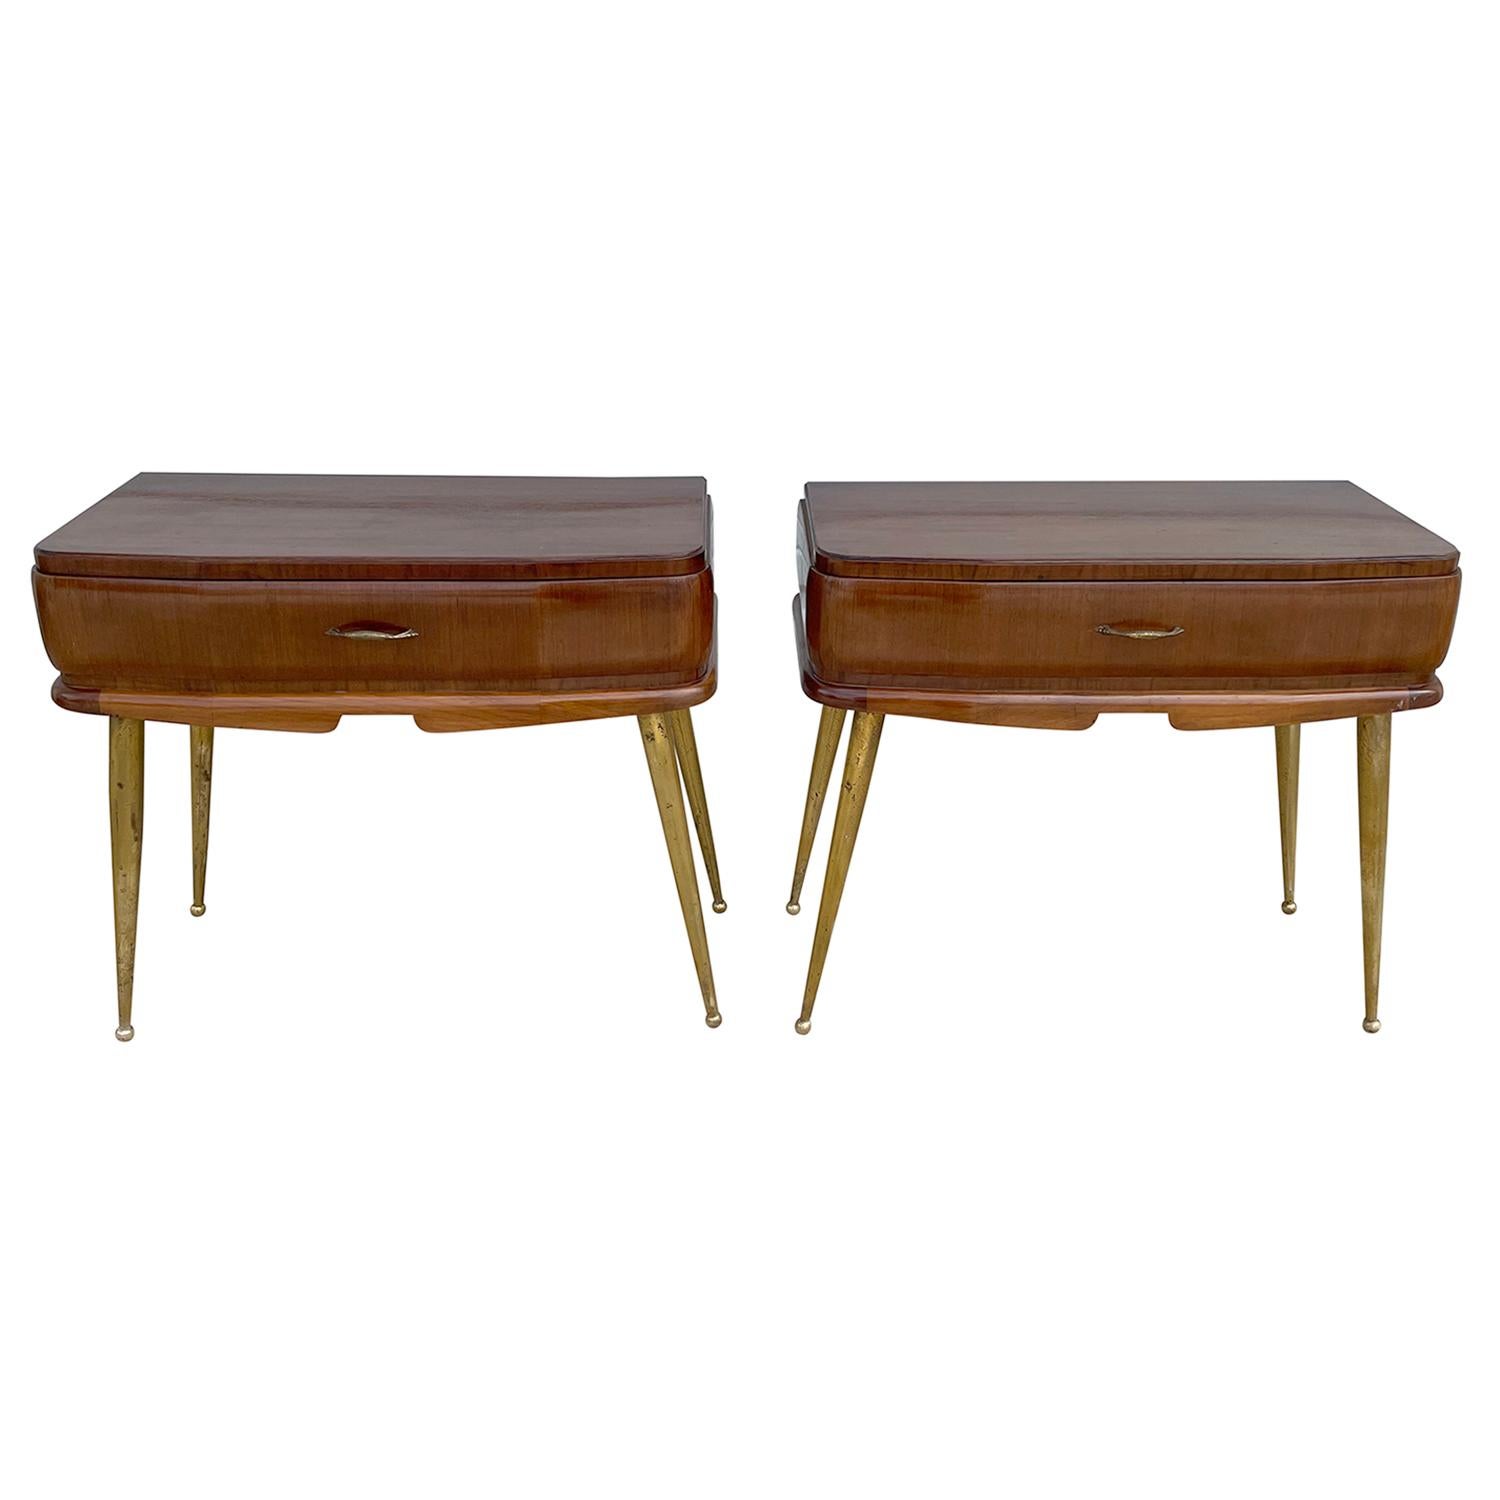 A dark-brown, vintage Mid-Century Modern Italian pair of nightstands, bedside tables made of hand crafted polished Mahogany with one-drawer, enhanced by detailed brass handles, supported four curved legs, in good condition. Wear consistent with age